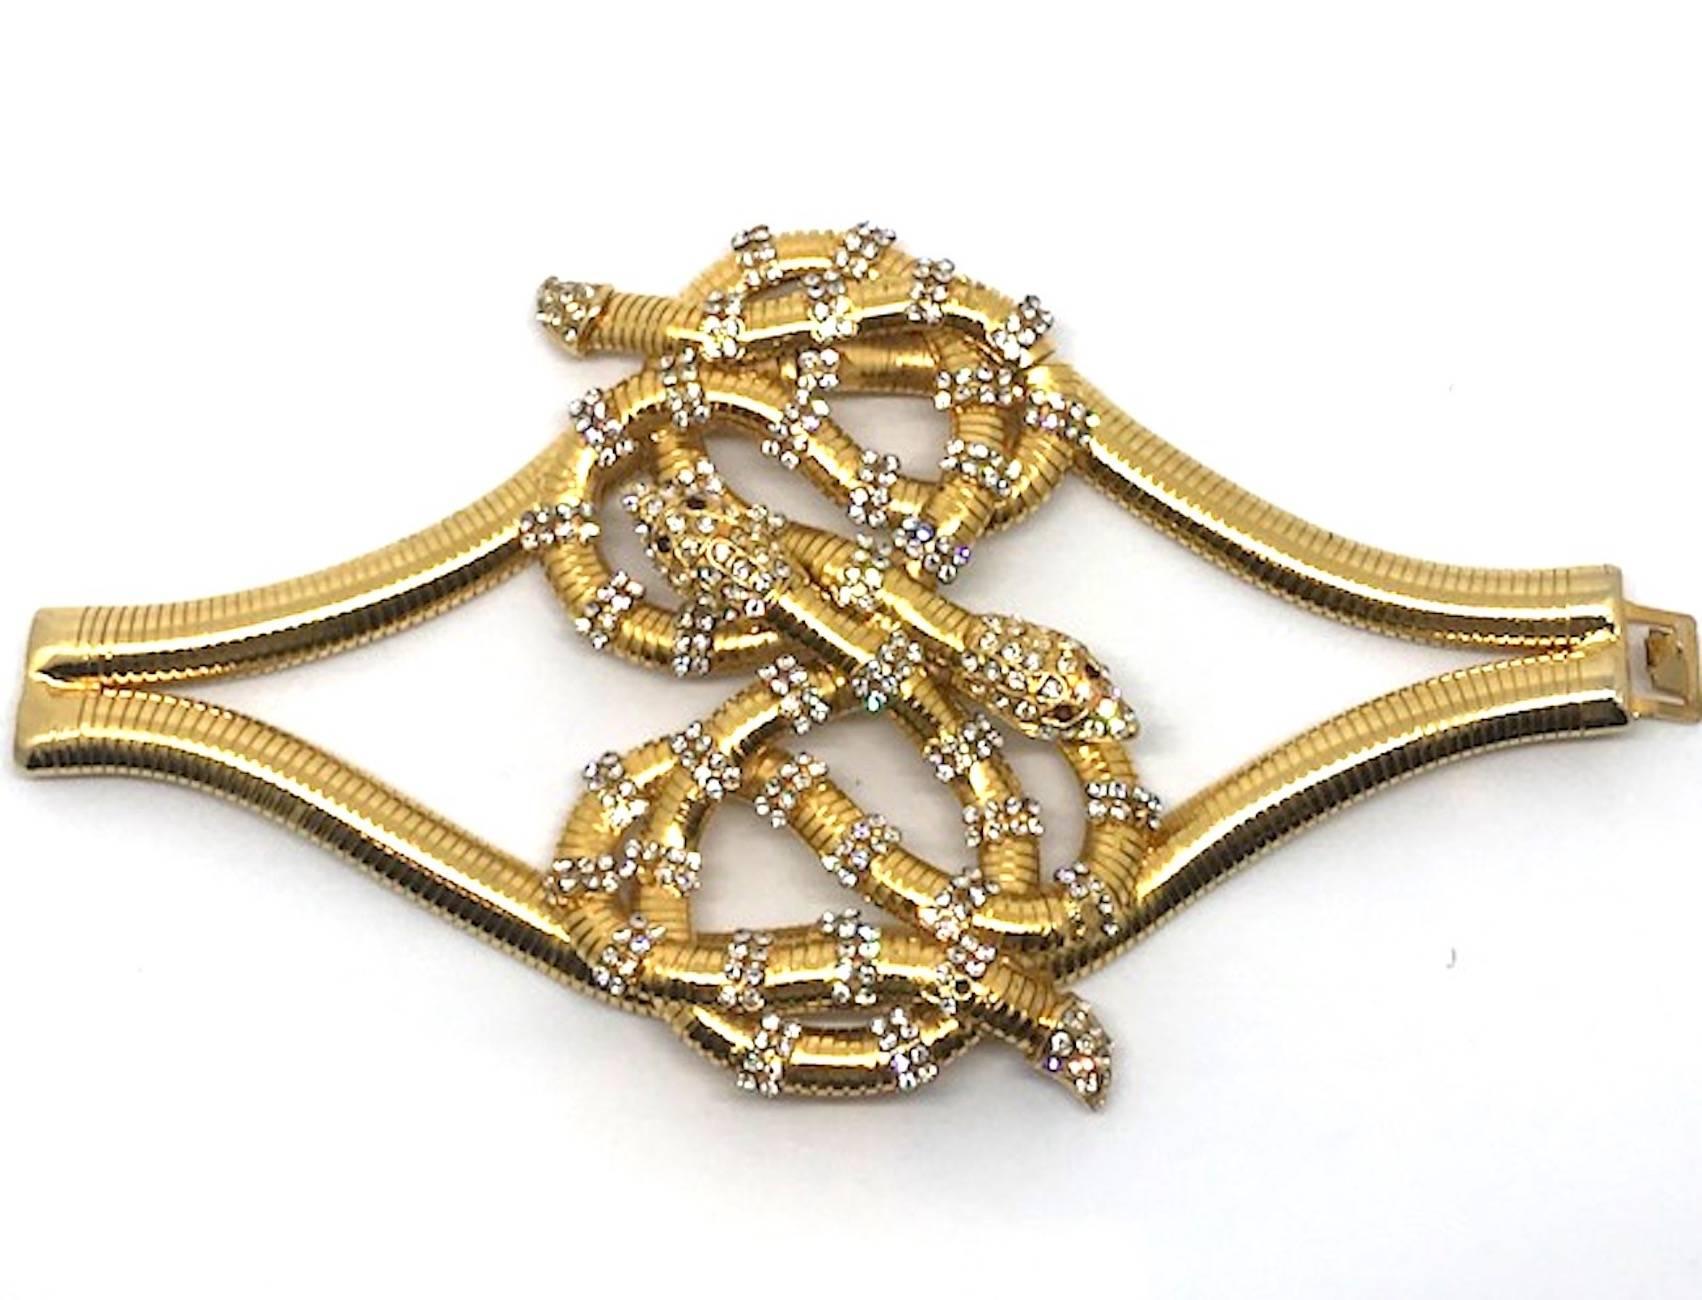 A true show stopper is this large gold plate with rhinestone accent layered large knot of serpents bracelet from the 1980s. The bracelet is from the personal collection of fine and costume jewelry of Italian actress Elsa Martinelli. Several pieces